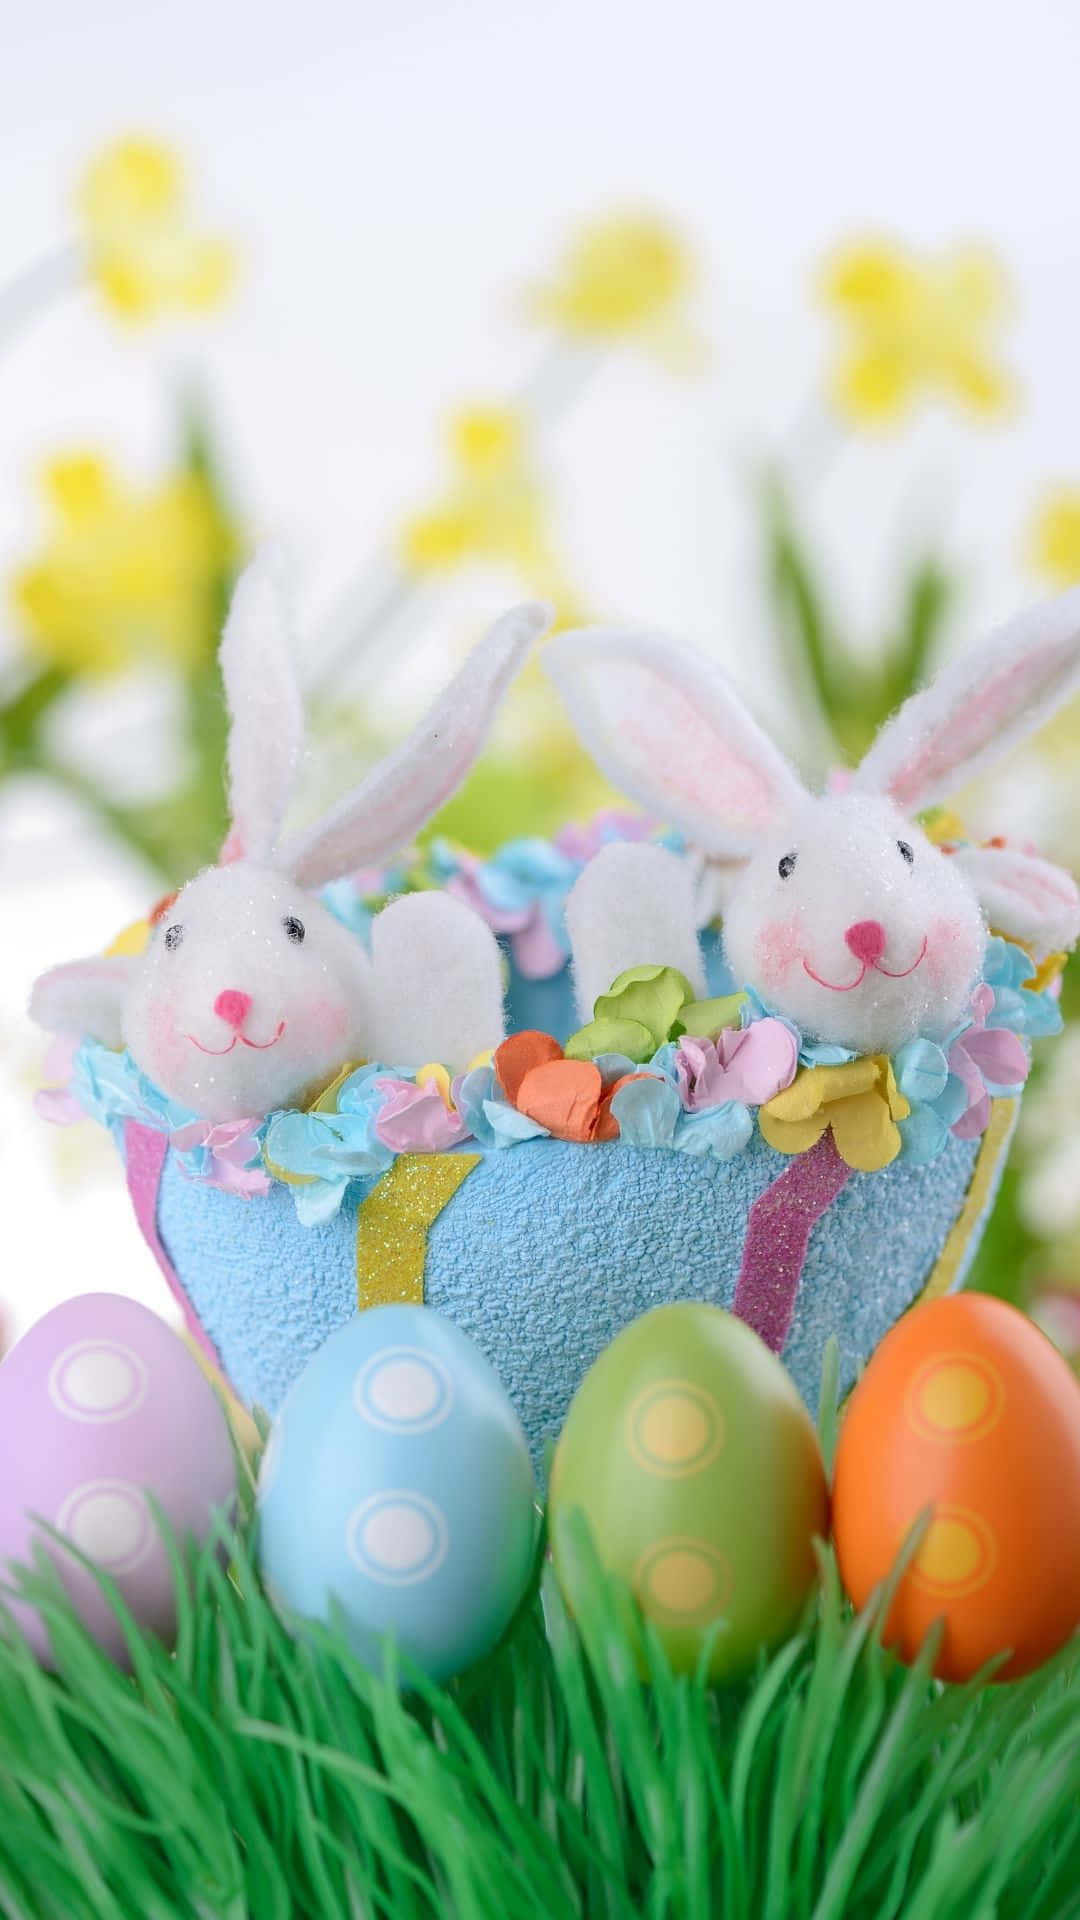 The Easter Bunny Bringing A Basket Of Flowers And Chocolate Eggs For You.